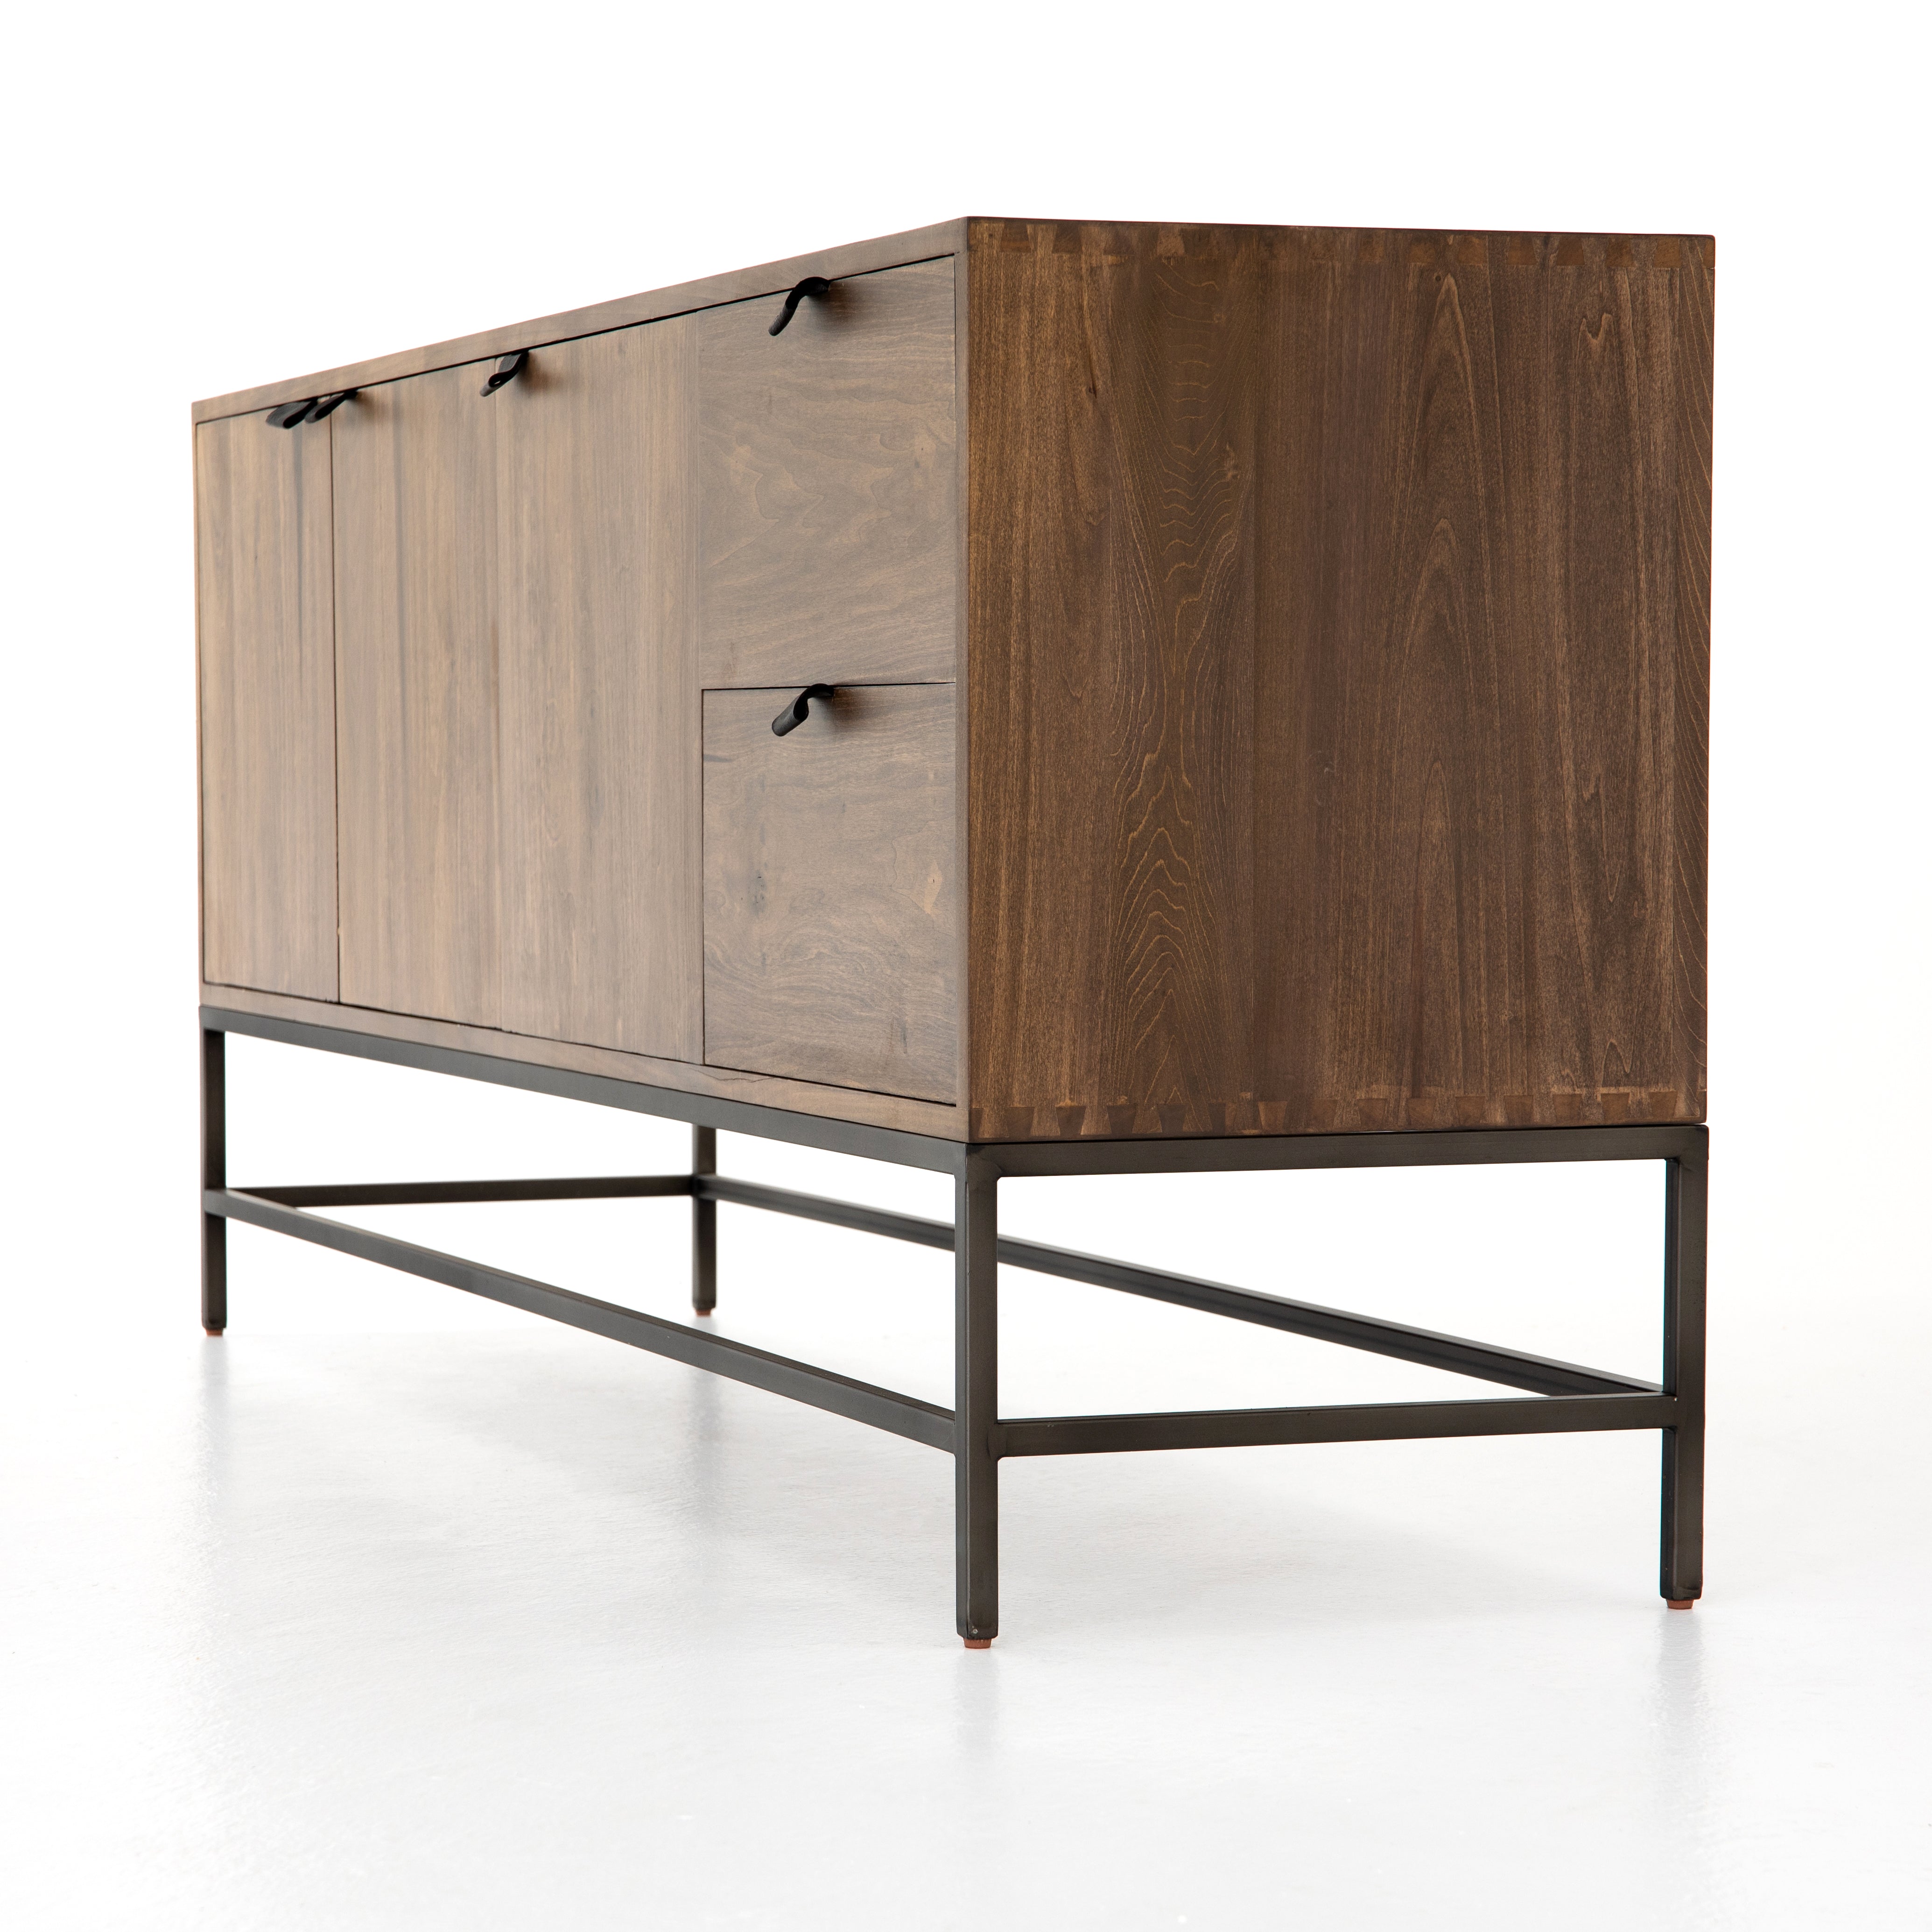 We love the clean, slim legs of this Trey Auburn Poplar Sideboard. The doors and drawers make this the perfect sideboard for families wanting extra storage space while also making a statement  Size: 72"w x 18"d x 31"h Materials: Iron, Poplar, Top Grain Leather